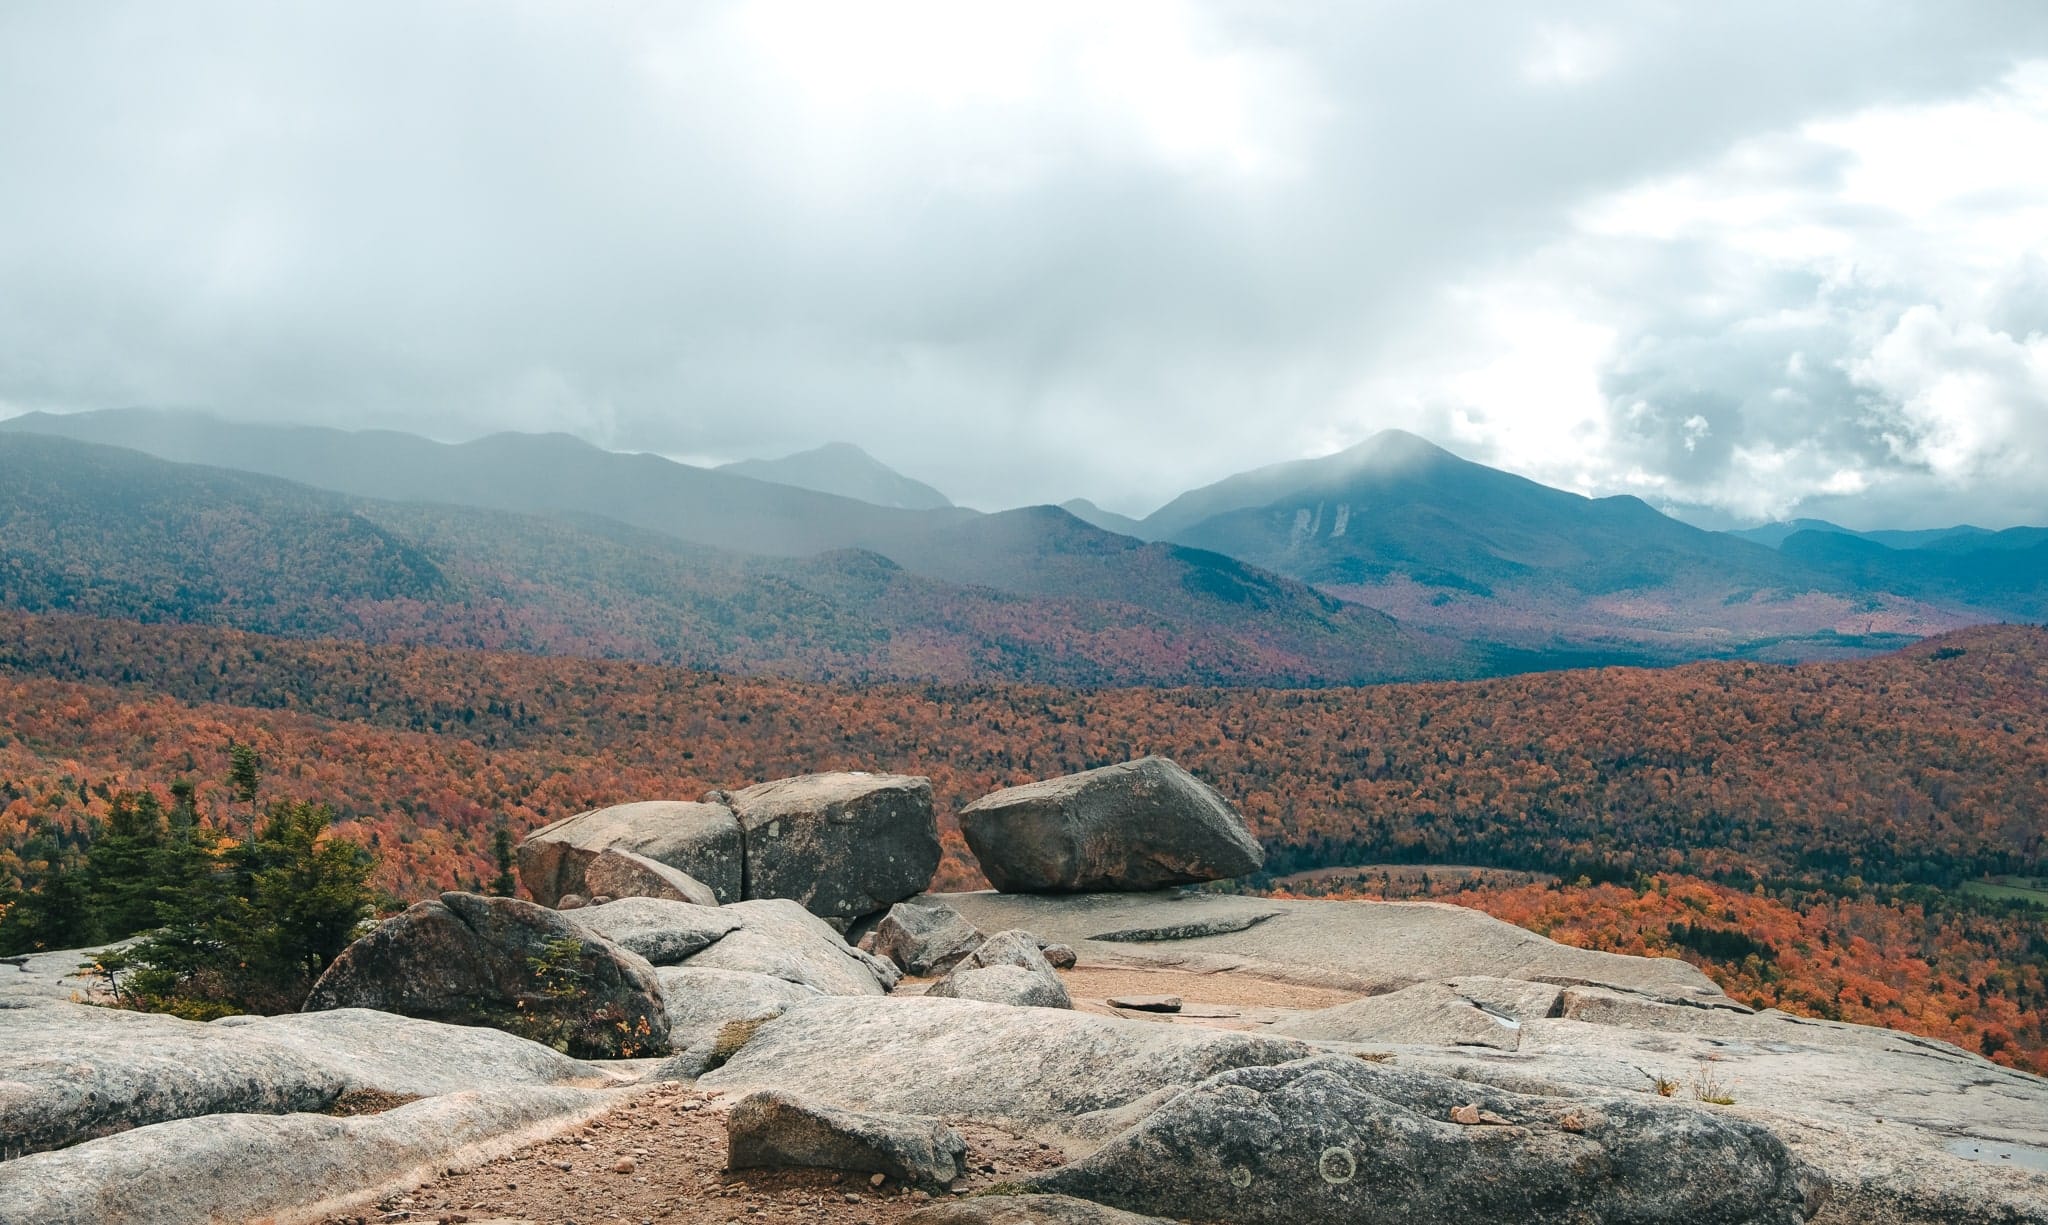 The Adirondack Mountains, which offer some of the best hikes in Upstate New York